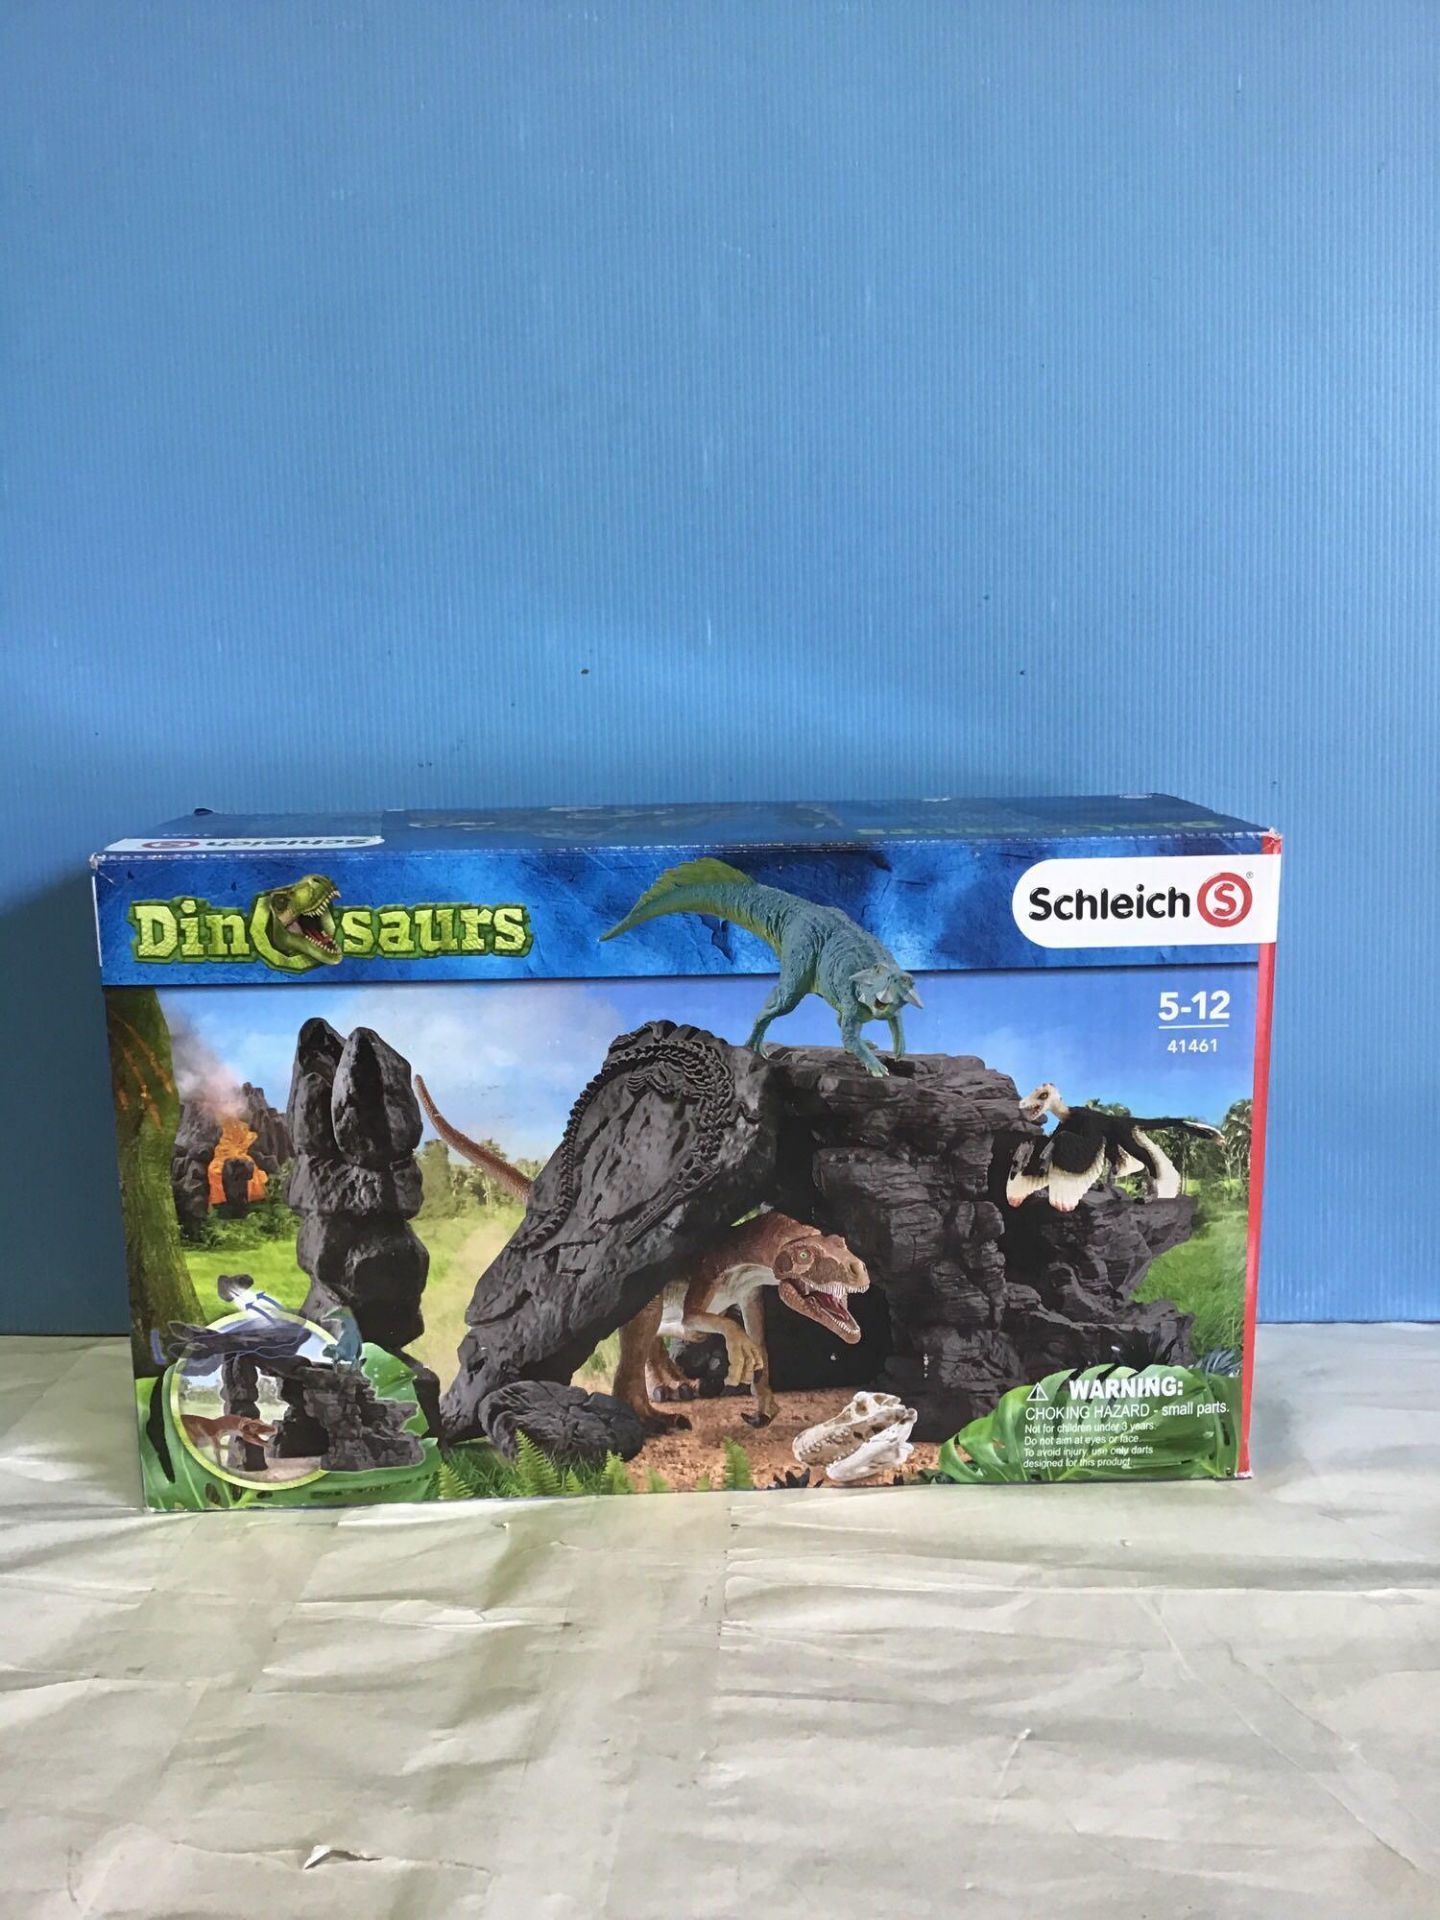 Schleich Dinosaurs 41461 Dino set with Cave £44.99 RRP - Image 3 of 5